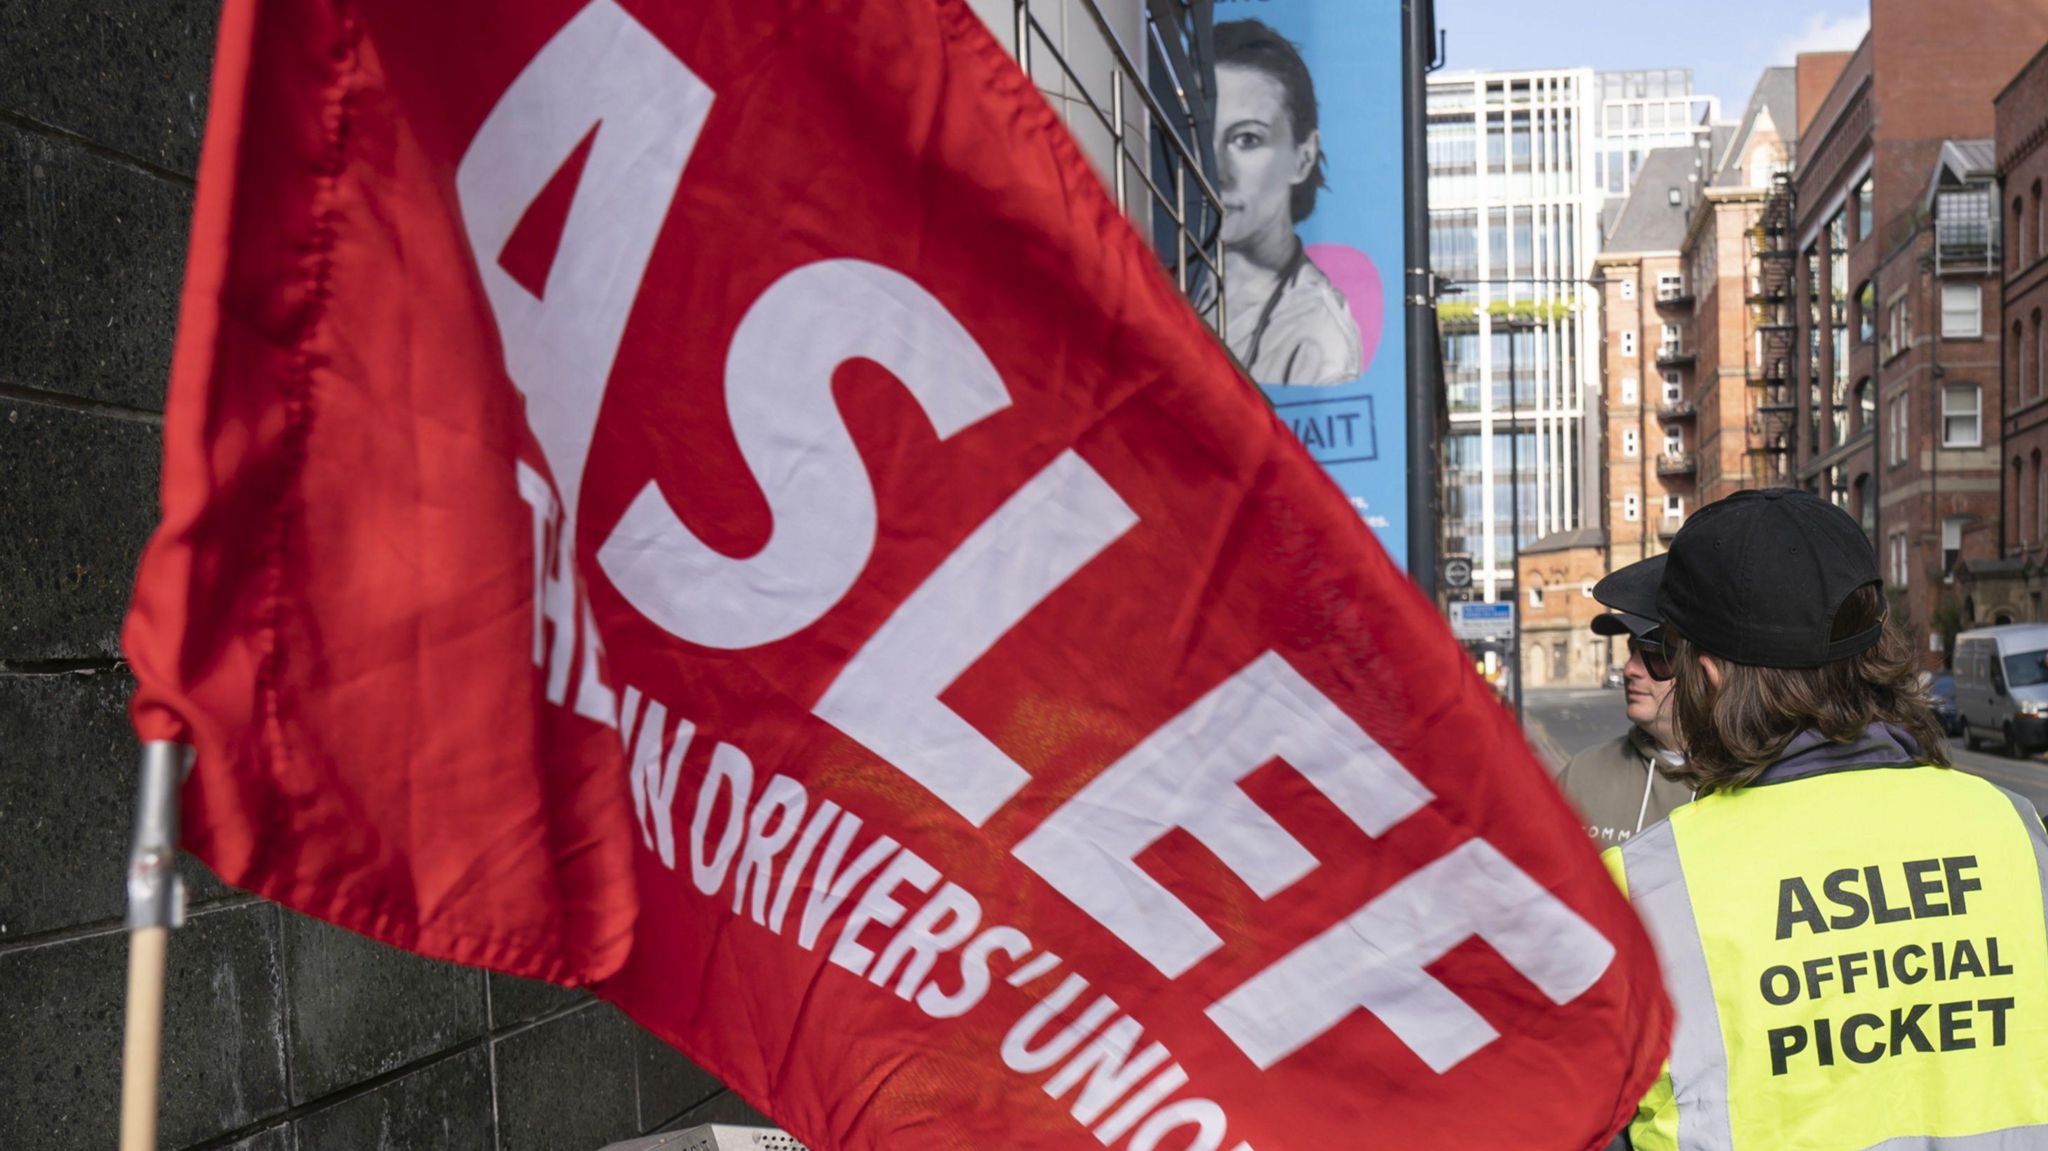 An Aslef flag, with a member of the union having his back to the camera, wearing a h-vis jacket reading "ASLEF OFFICIAL PICKET"